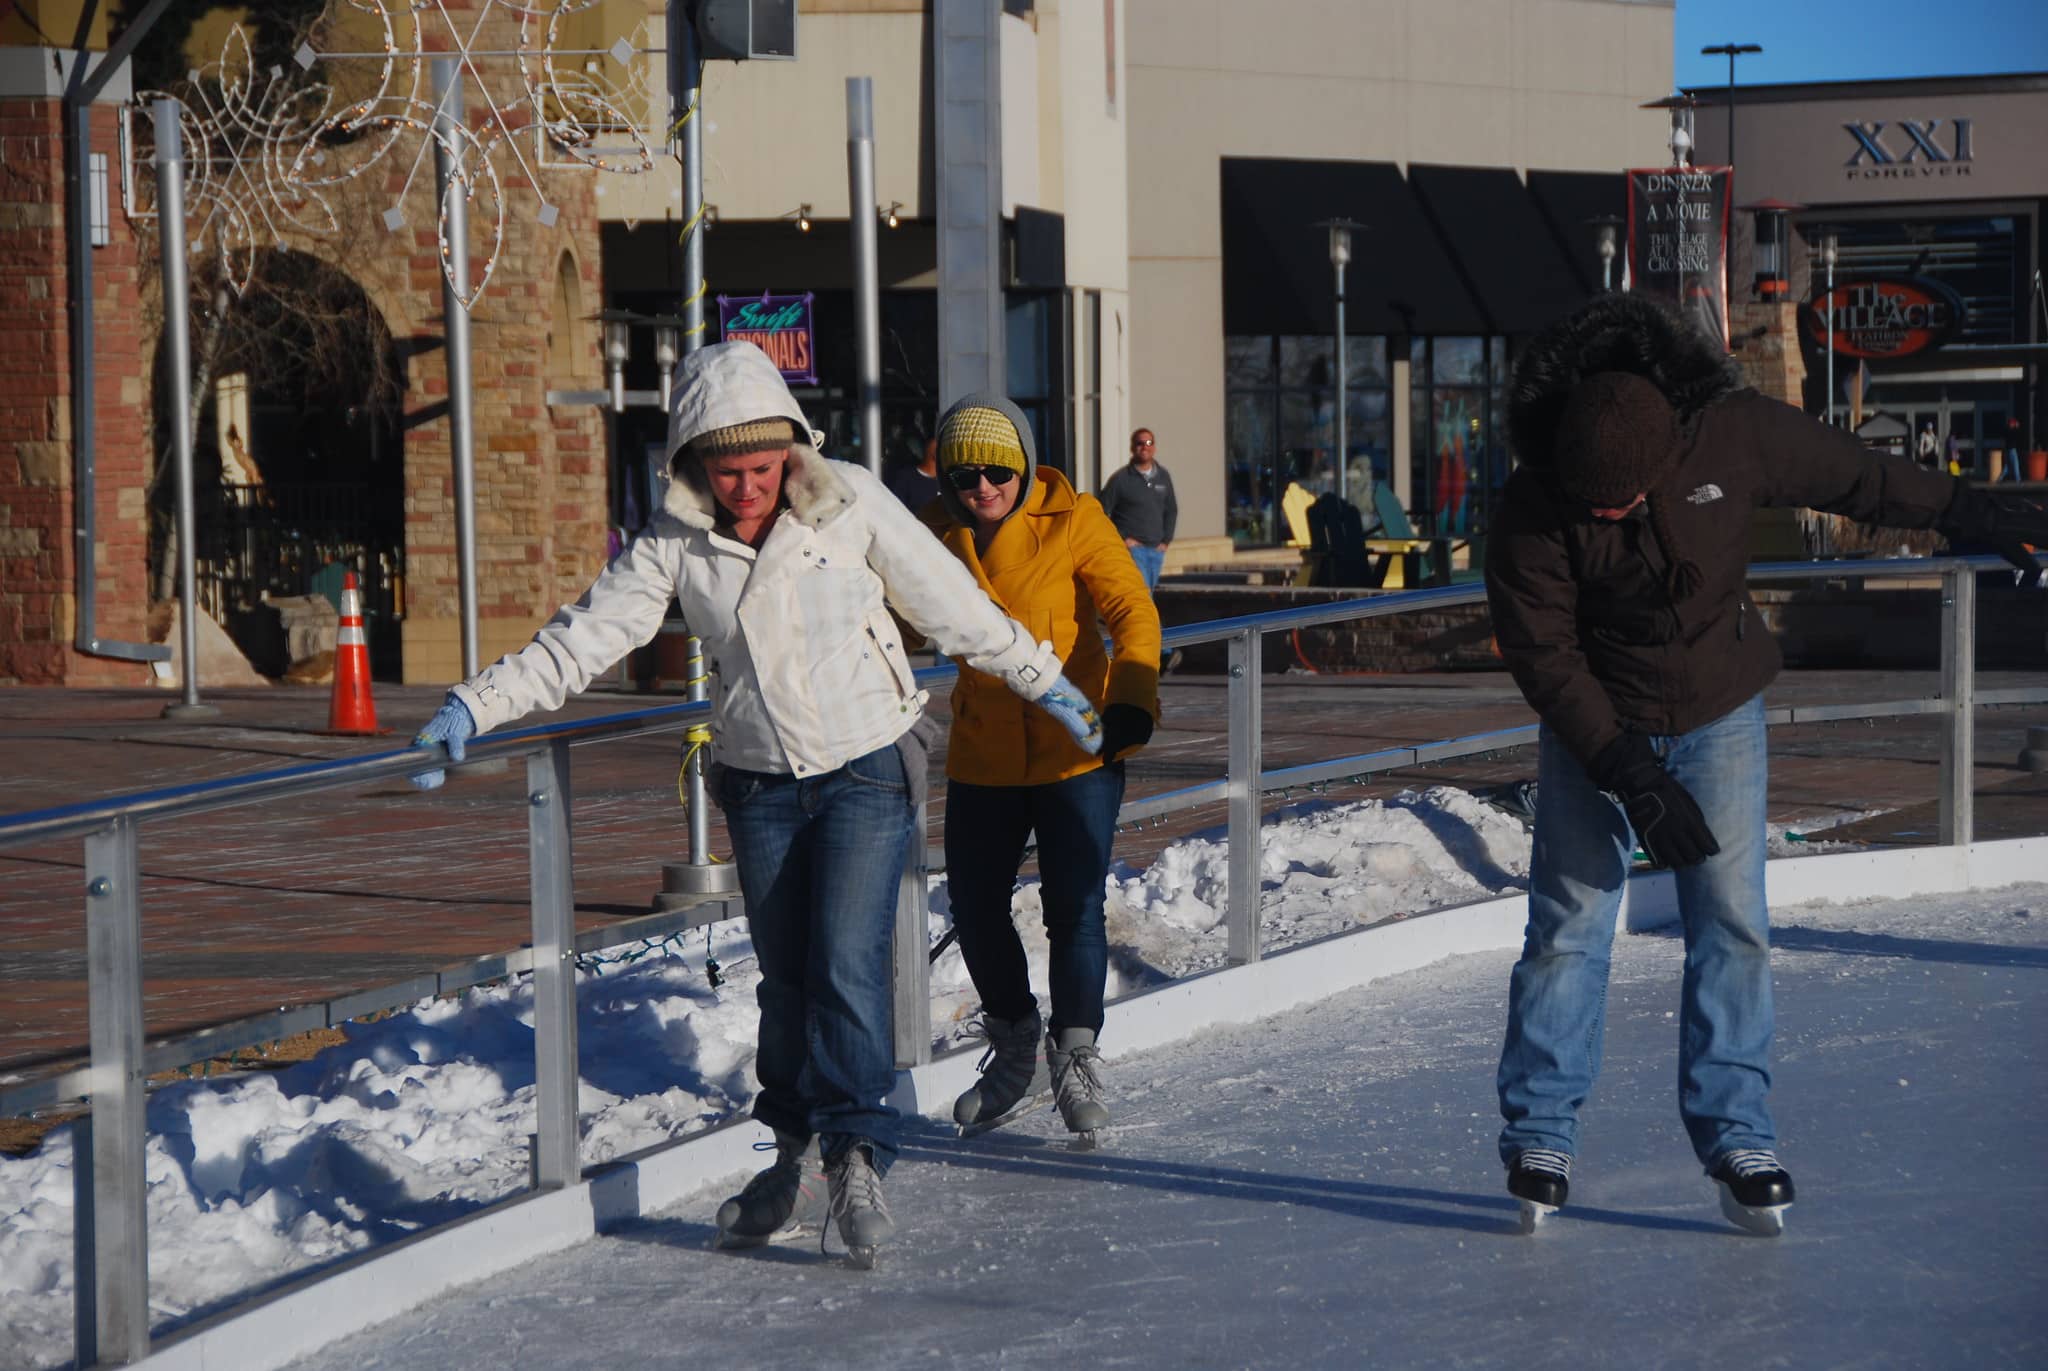 3 people ice skating on an outdoor rink